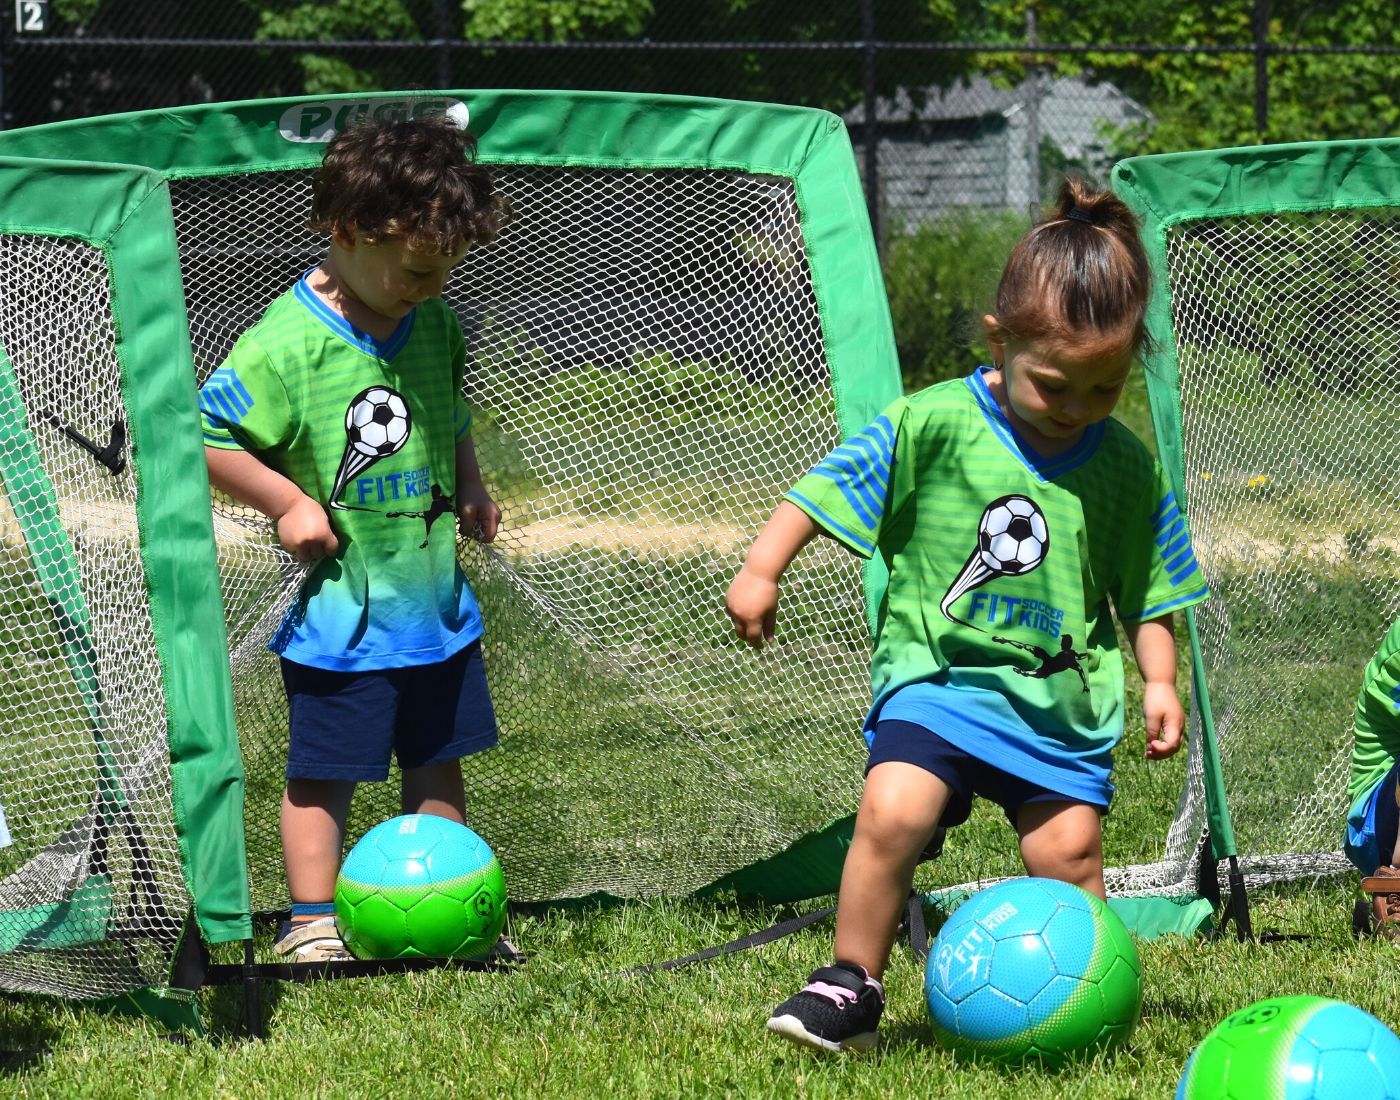 Can your Toddler Play Soccer?